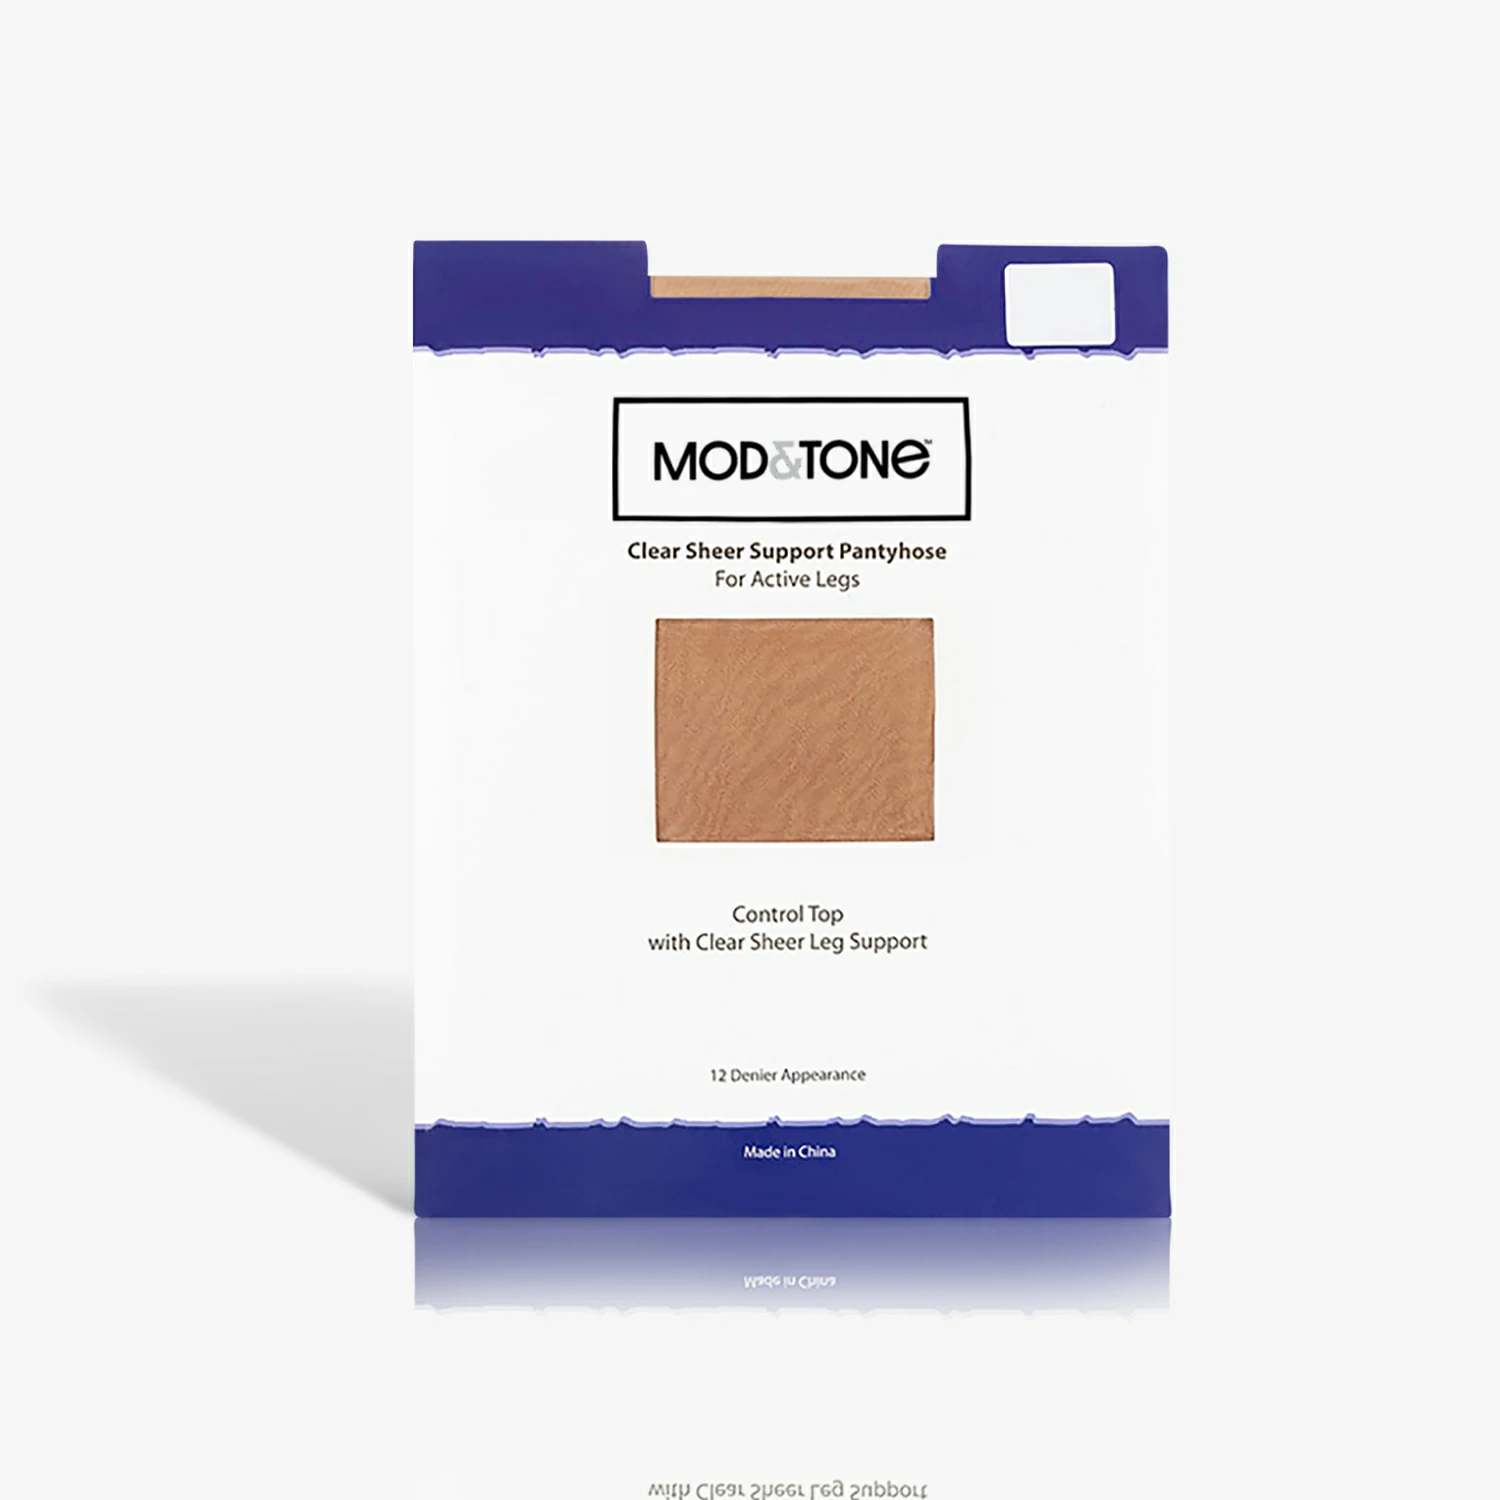 Mod&tone 6 pack Clear Sheer Pantyhose Support 12 denier is a must-have for your skincare routine. This high-quality mask will leave your skin feeling refreshed and rejuvenated. With its clear and sheer design, it provides